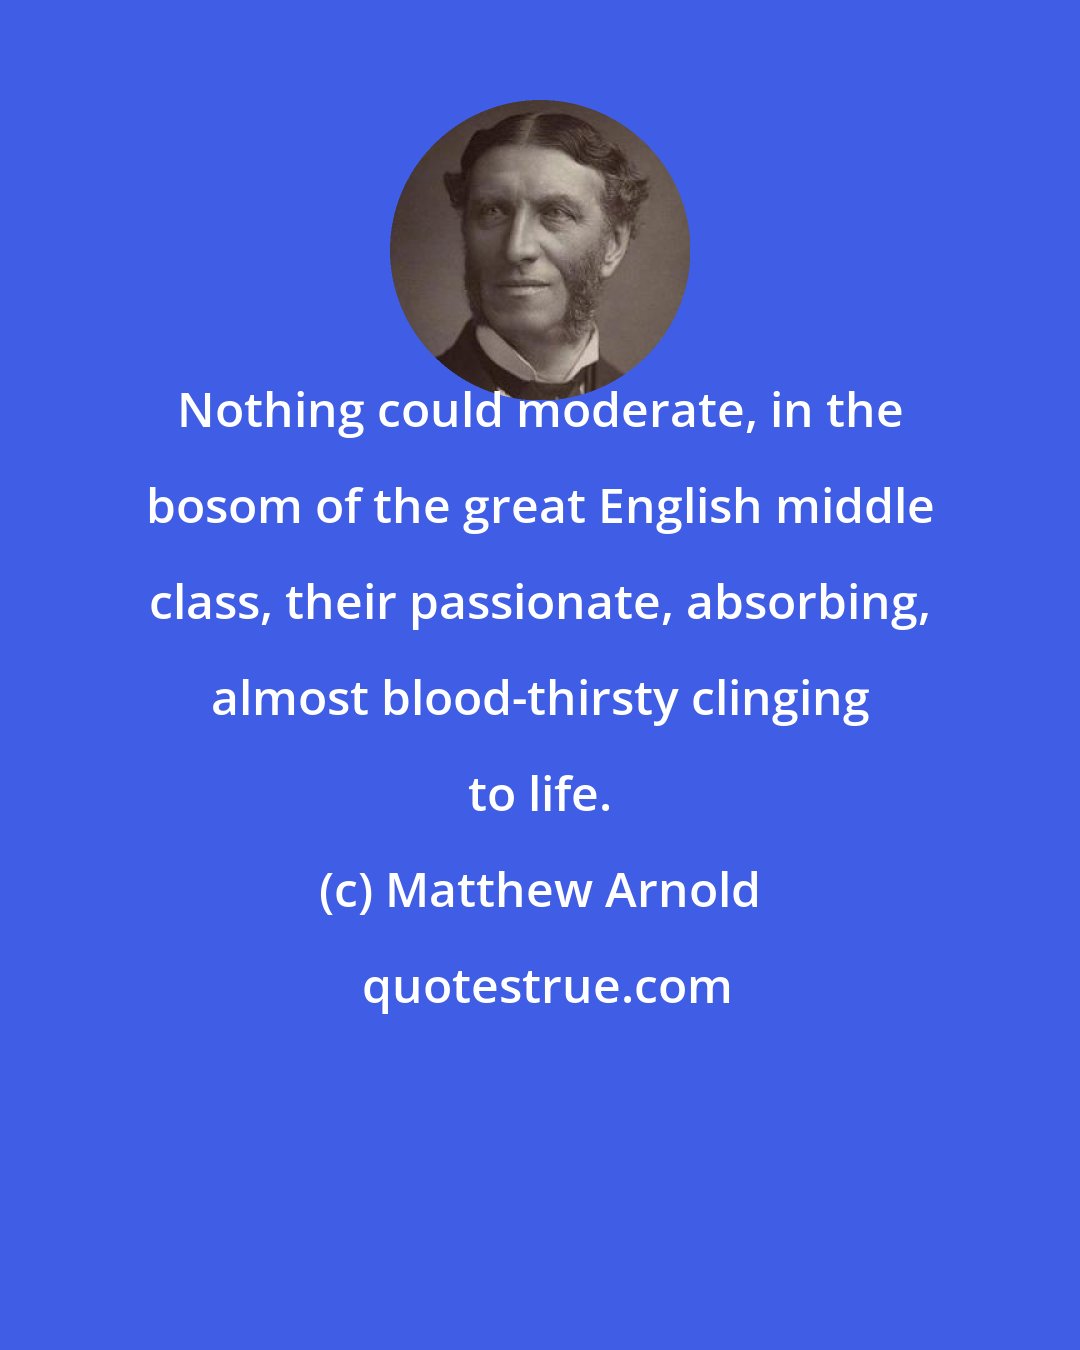 Matthew Arnold: Nothing could moderate, in the bosom of the great English middle class, their passionate, absorbing, almost blood-thirsty clinging to life.